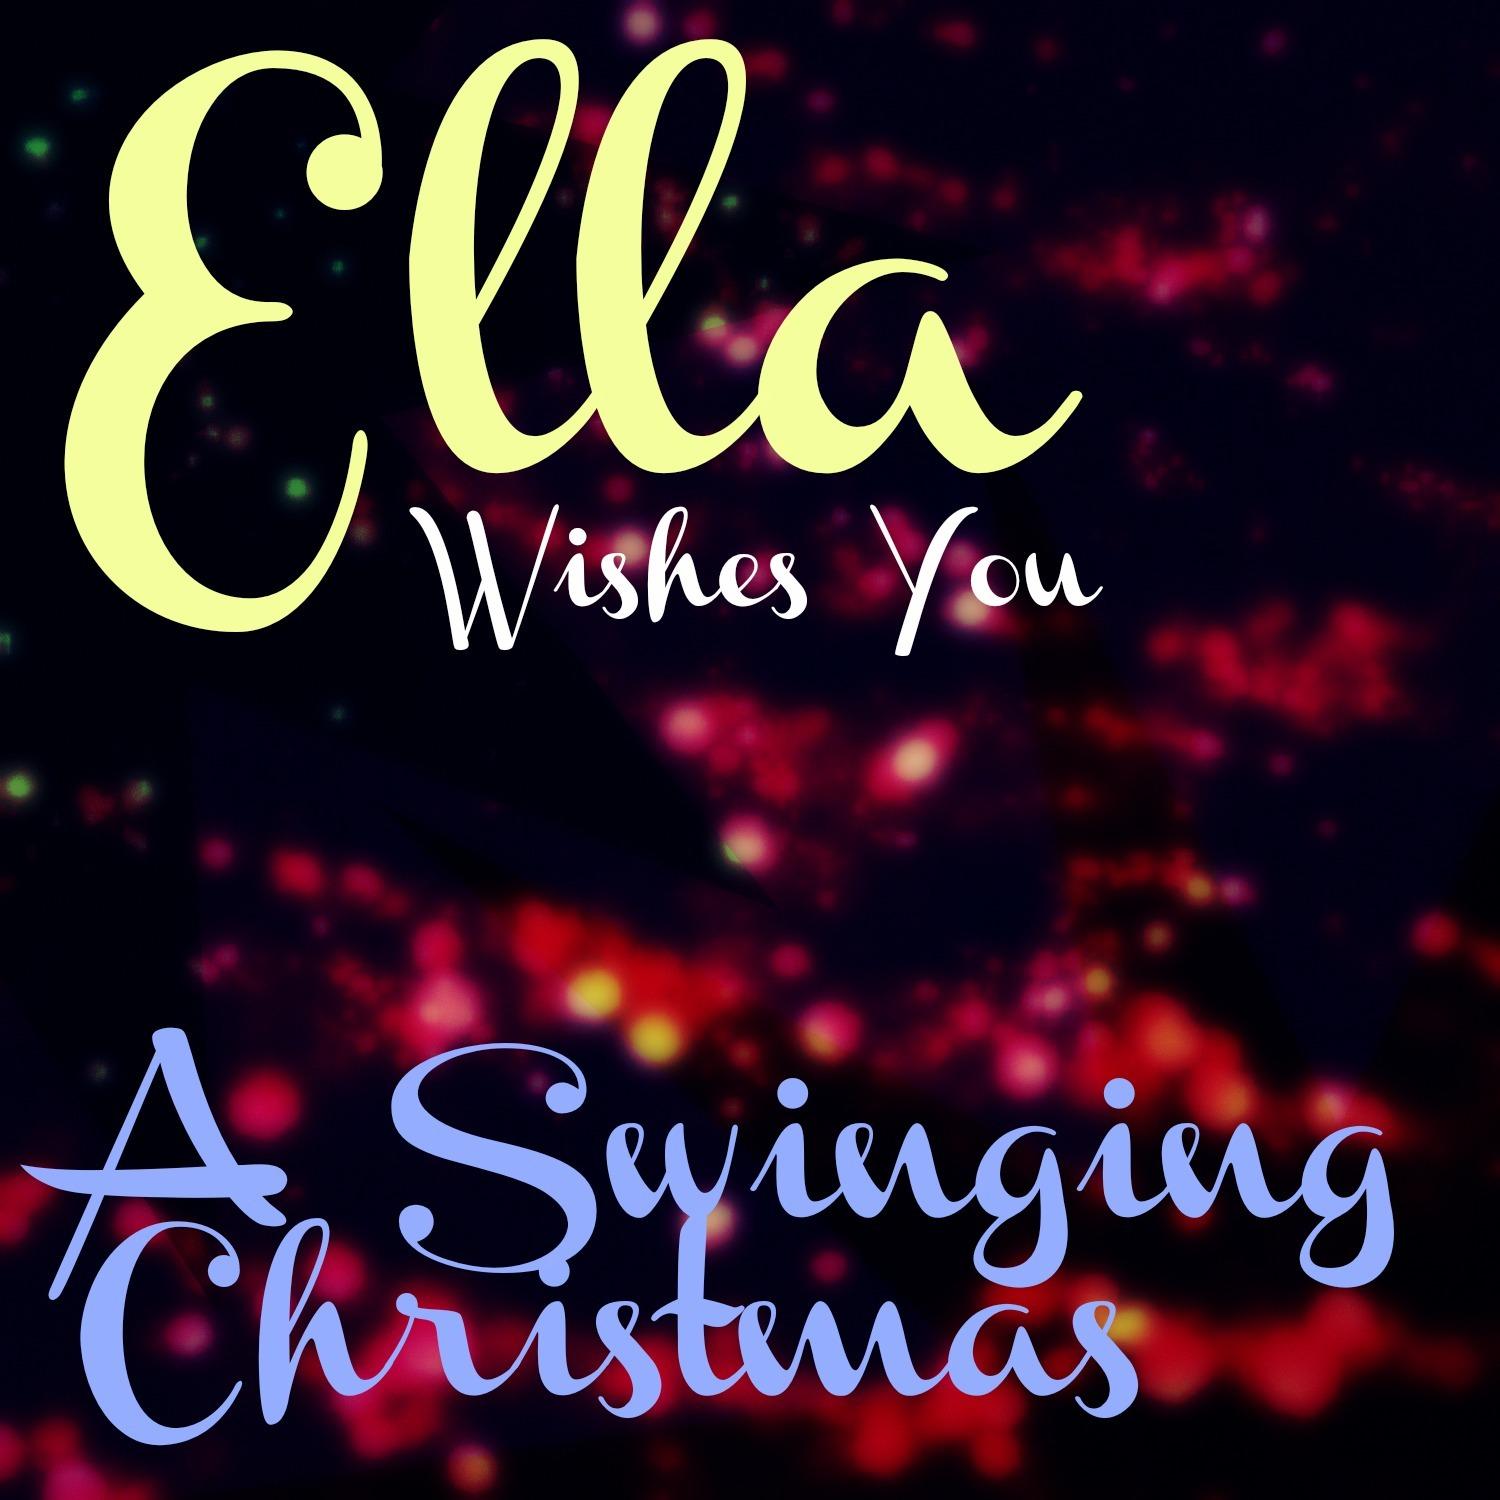 Ella Wishes You a Swinging Christmas (Remastered)